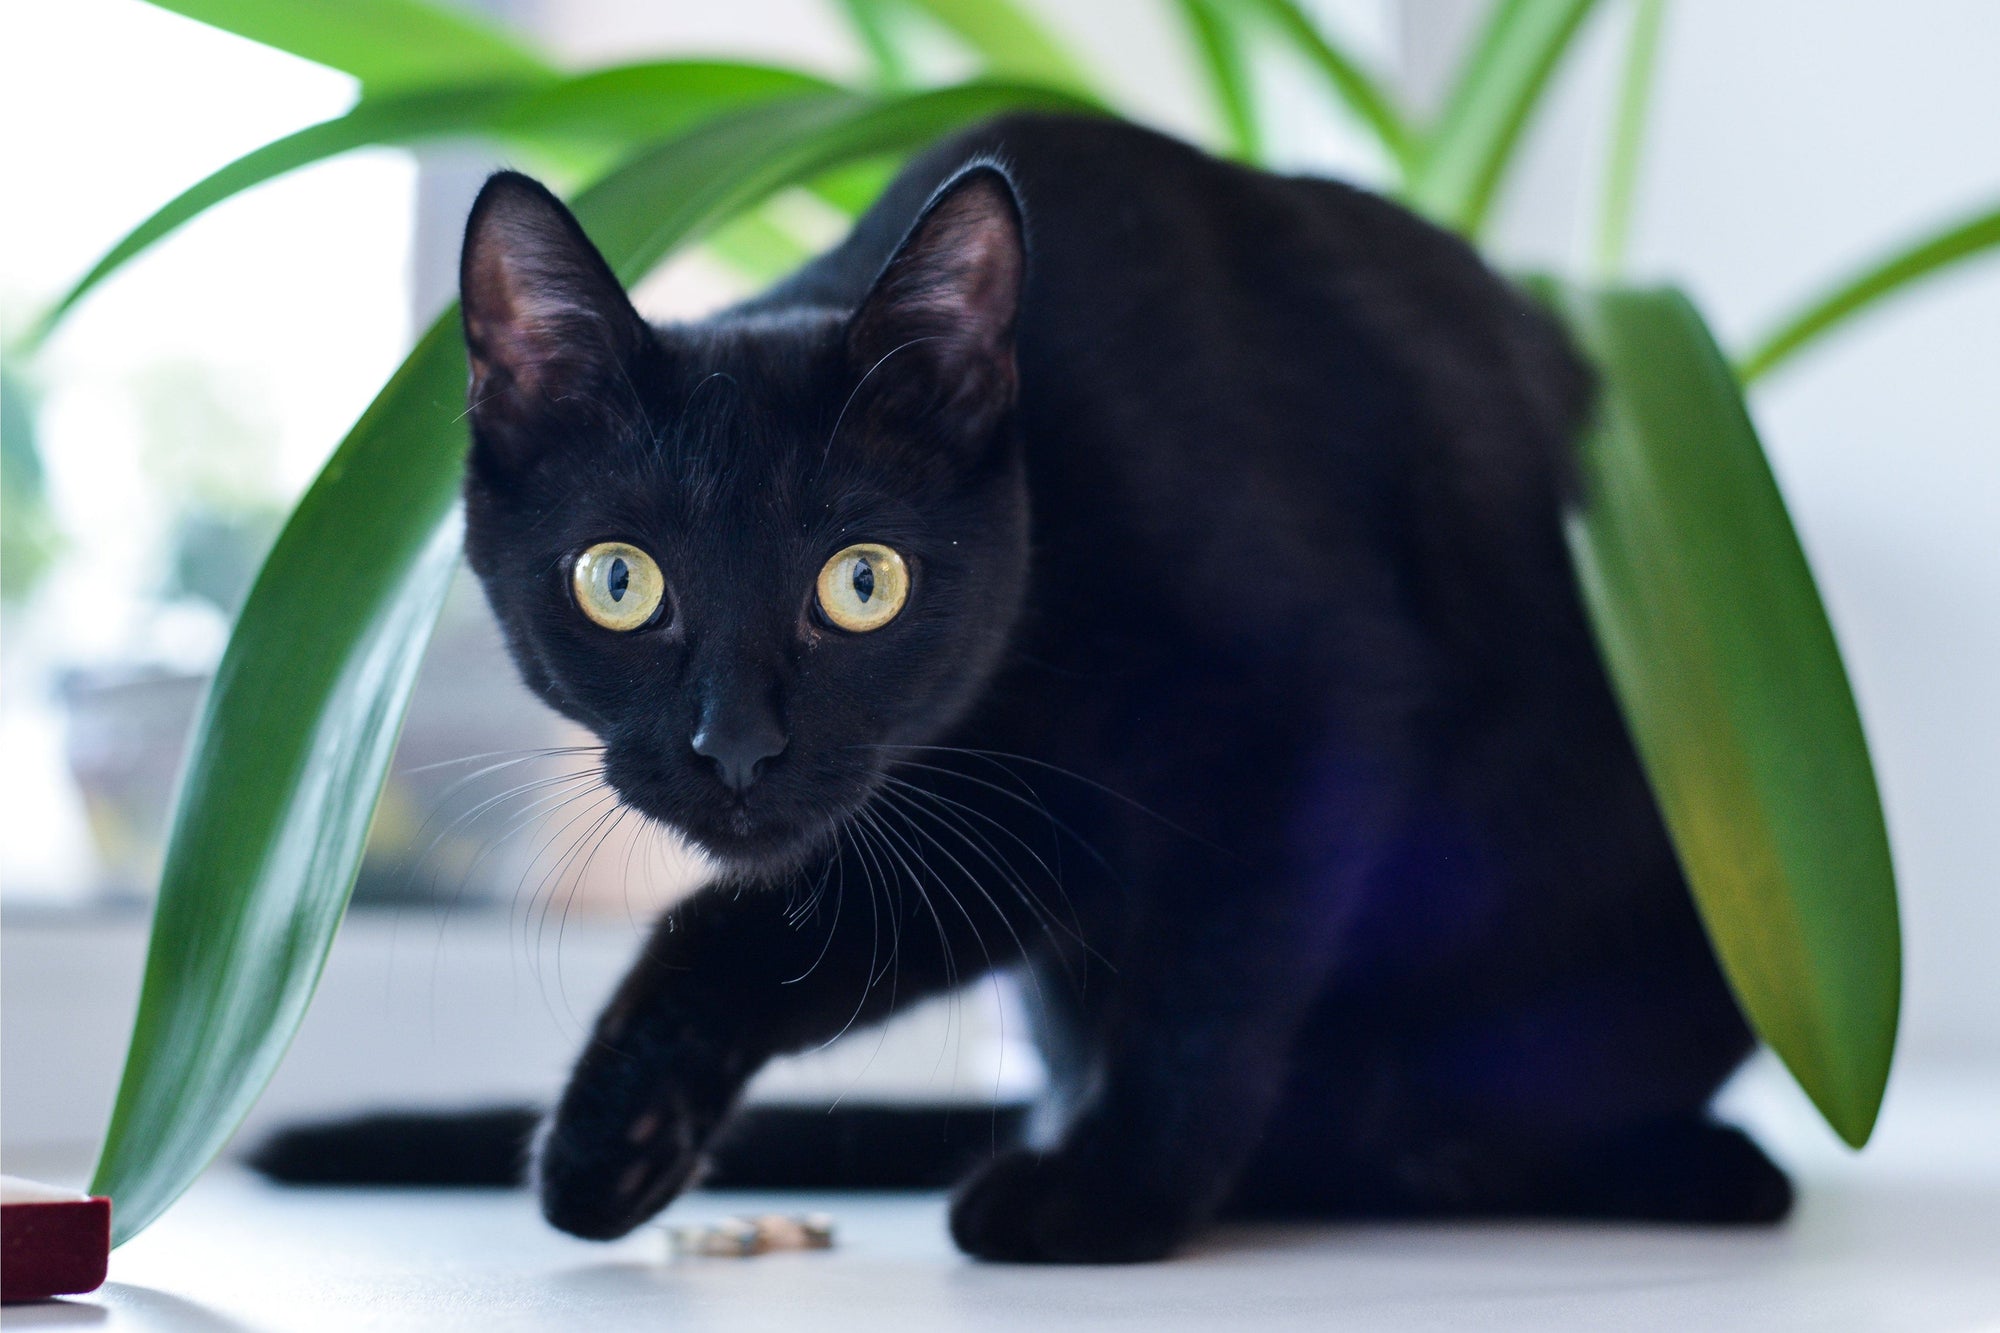 The Bombay Cat: Breed History, Fun Facts and Myths